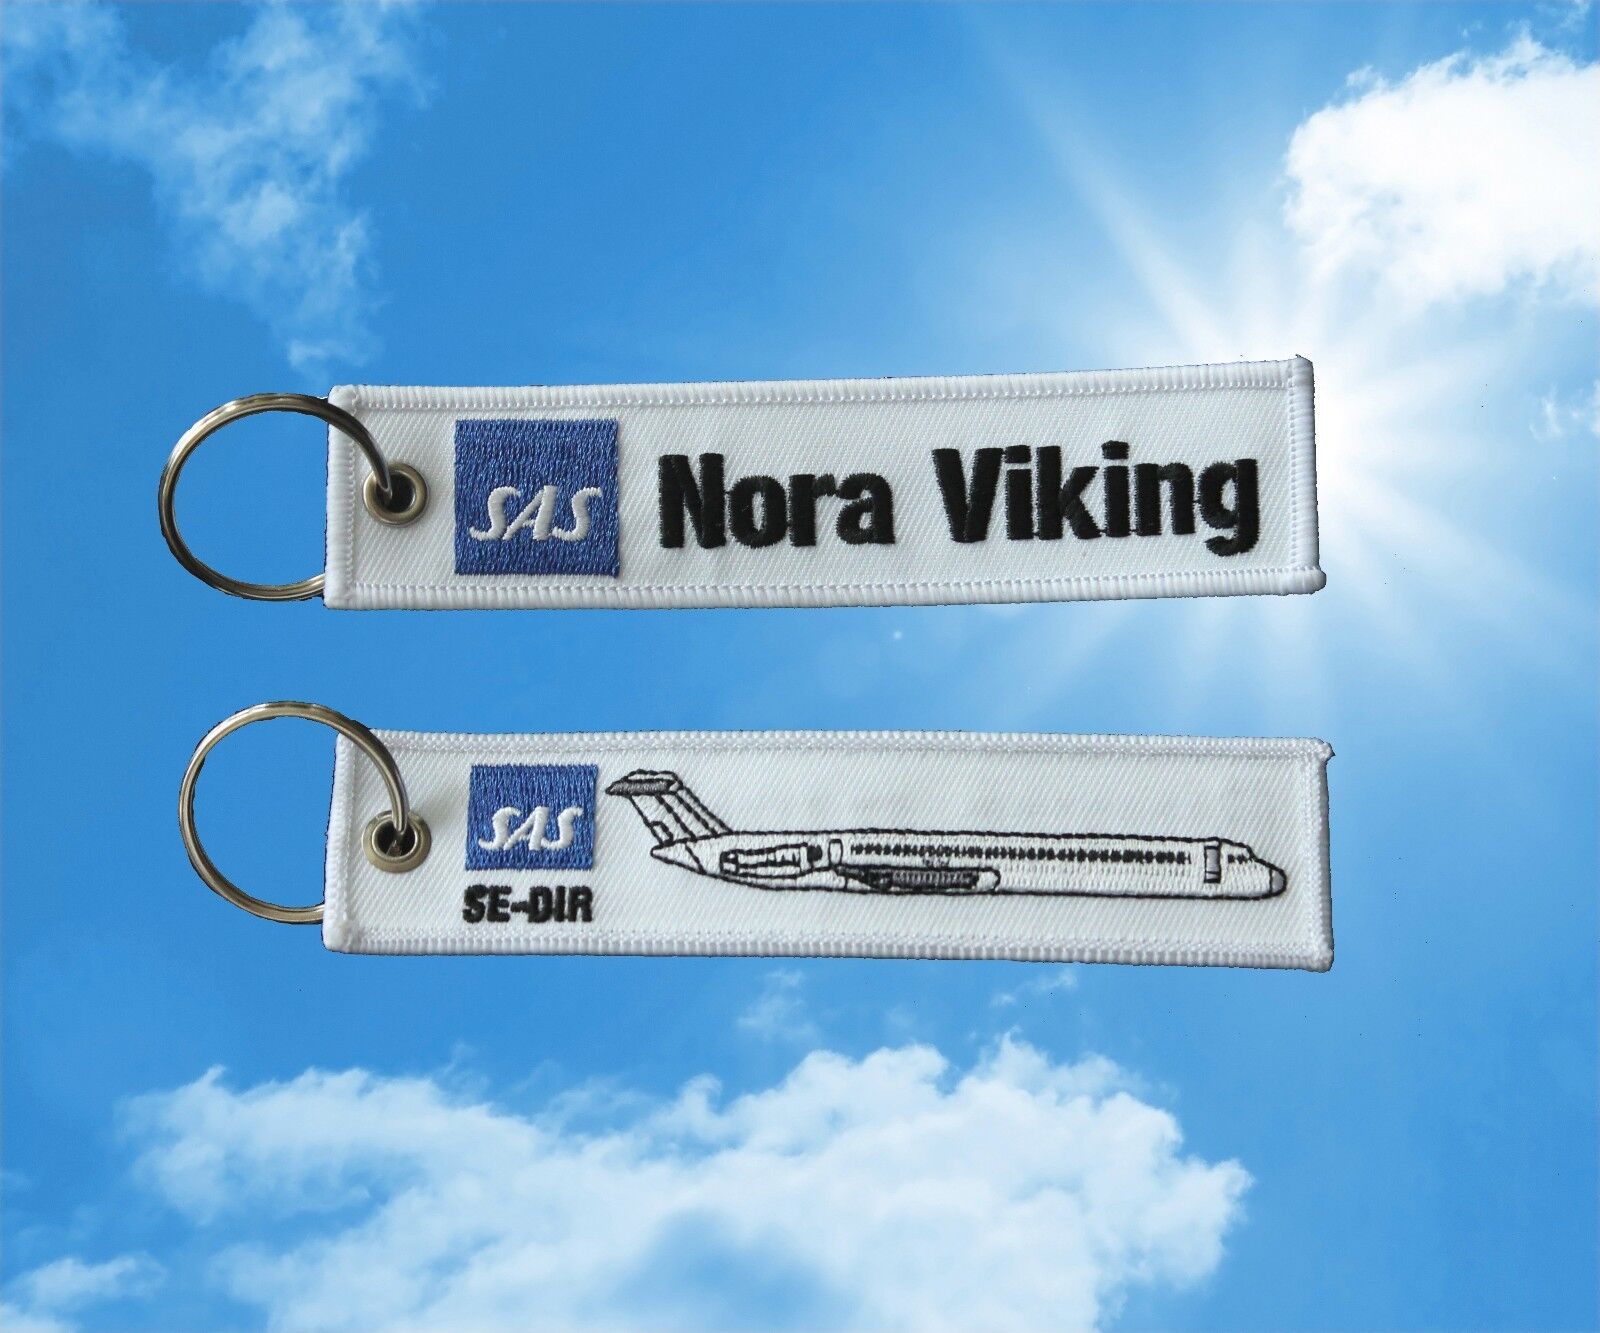 2x SAS Nora Viking MD80 Scandinavian Airlines keychain luggage baggage Tag Blue